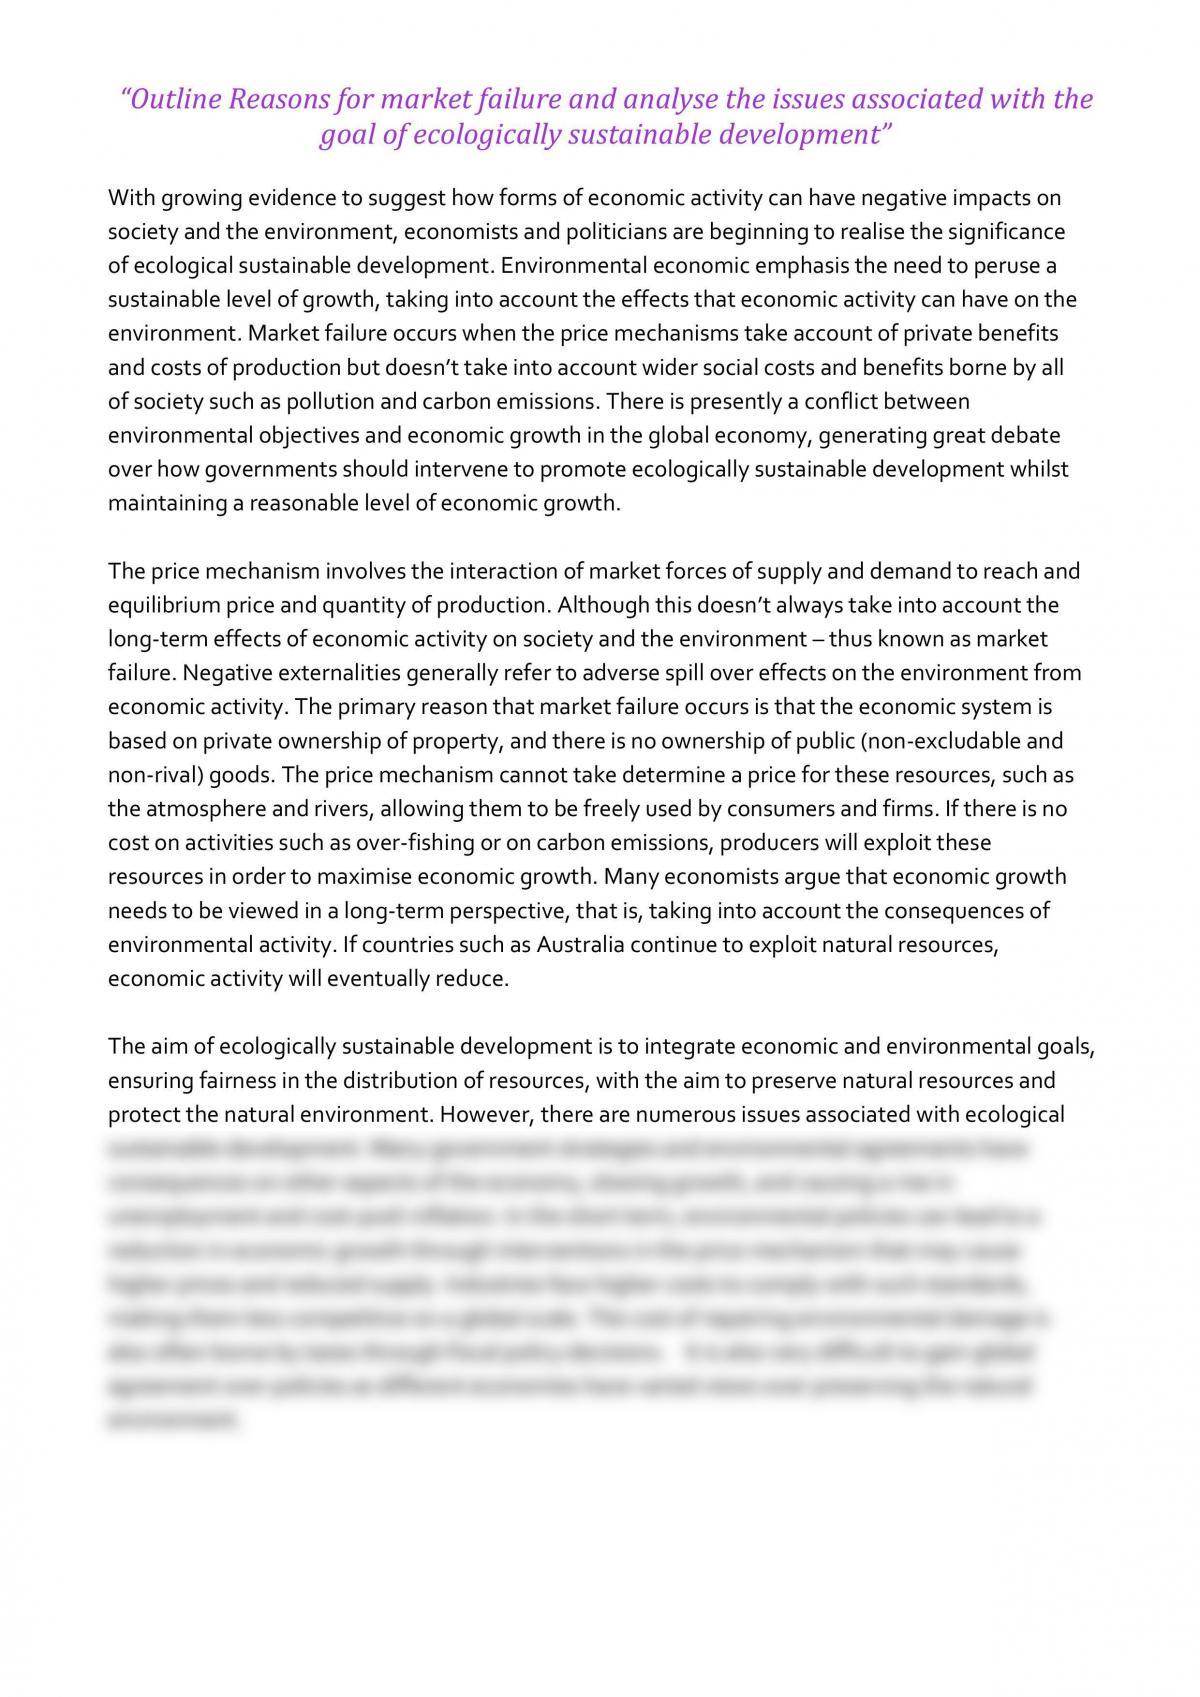 opinion essay on the environment